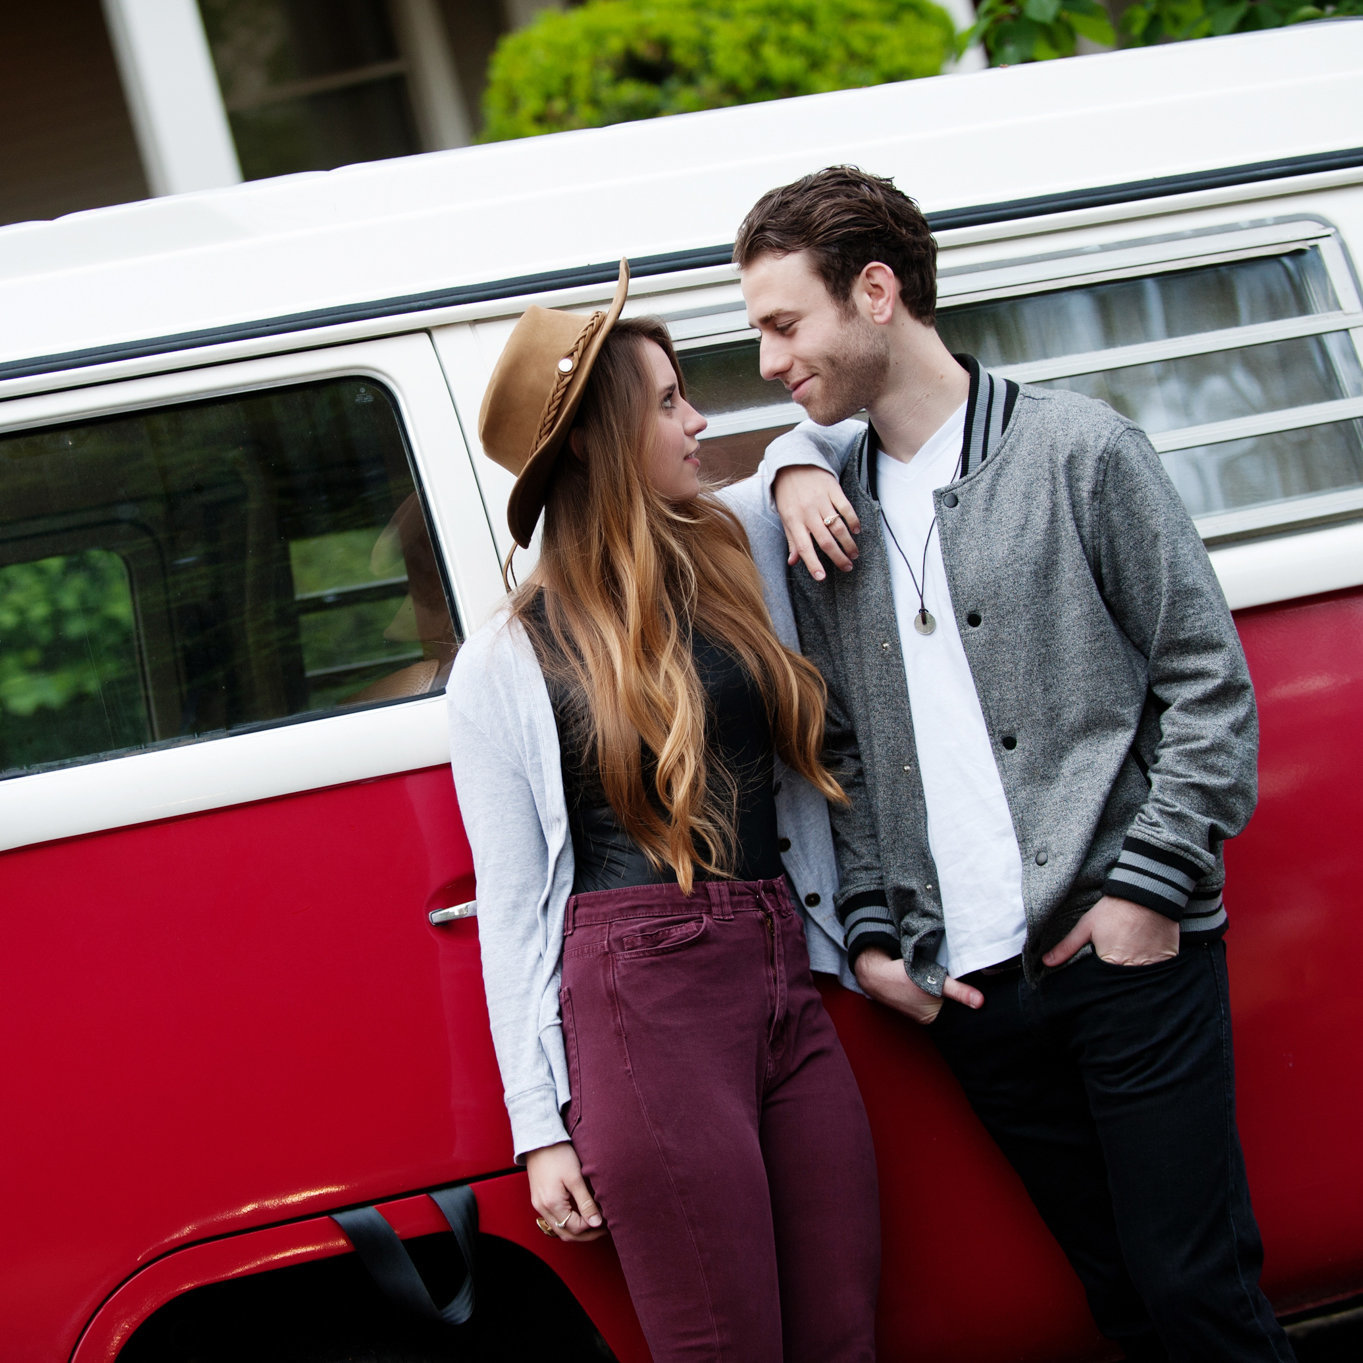 a stylish man and woman stand close in front of a vibrant red and white vw bus